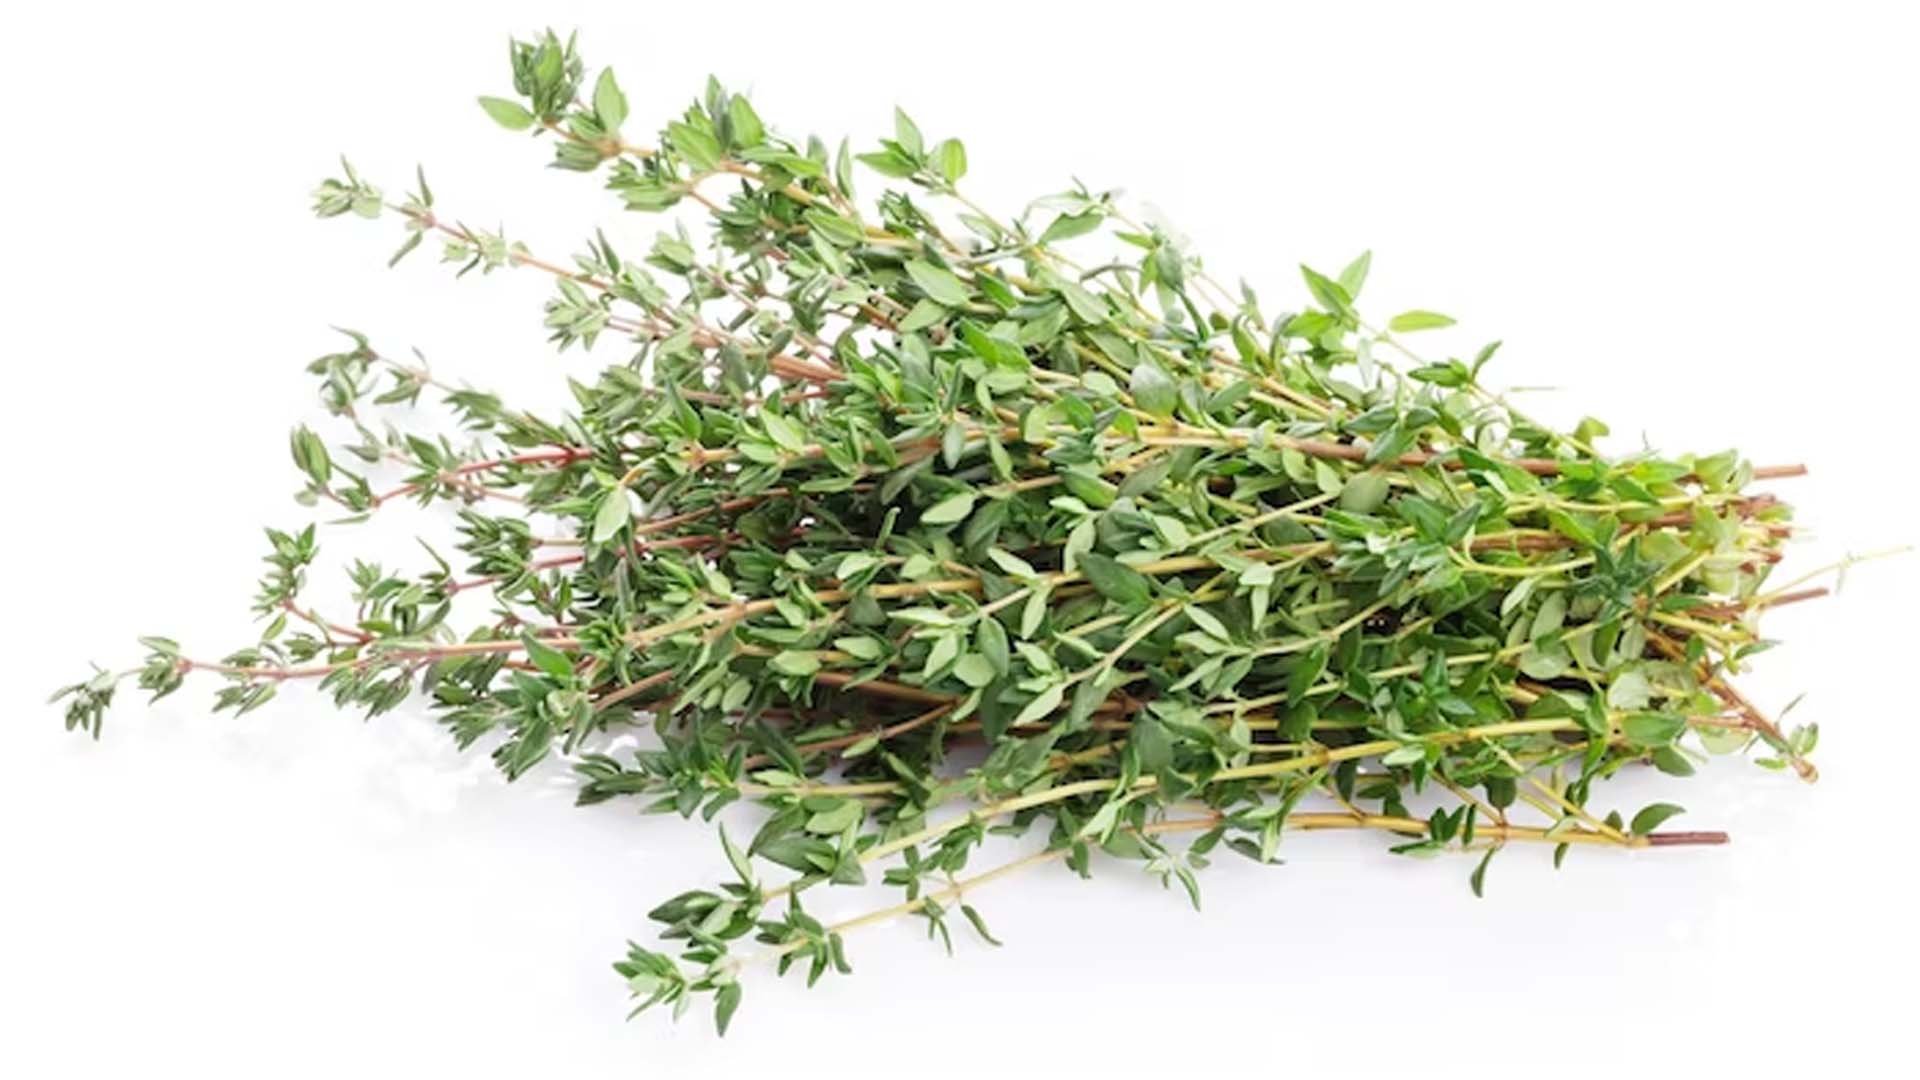 Health Benefits of Thyme